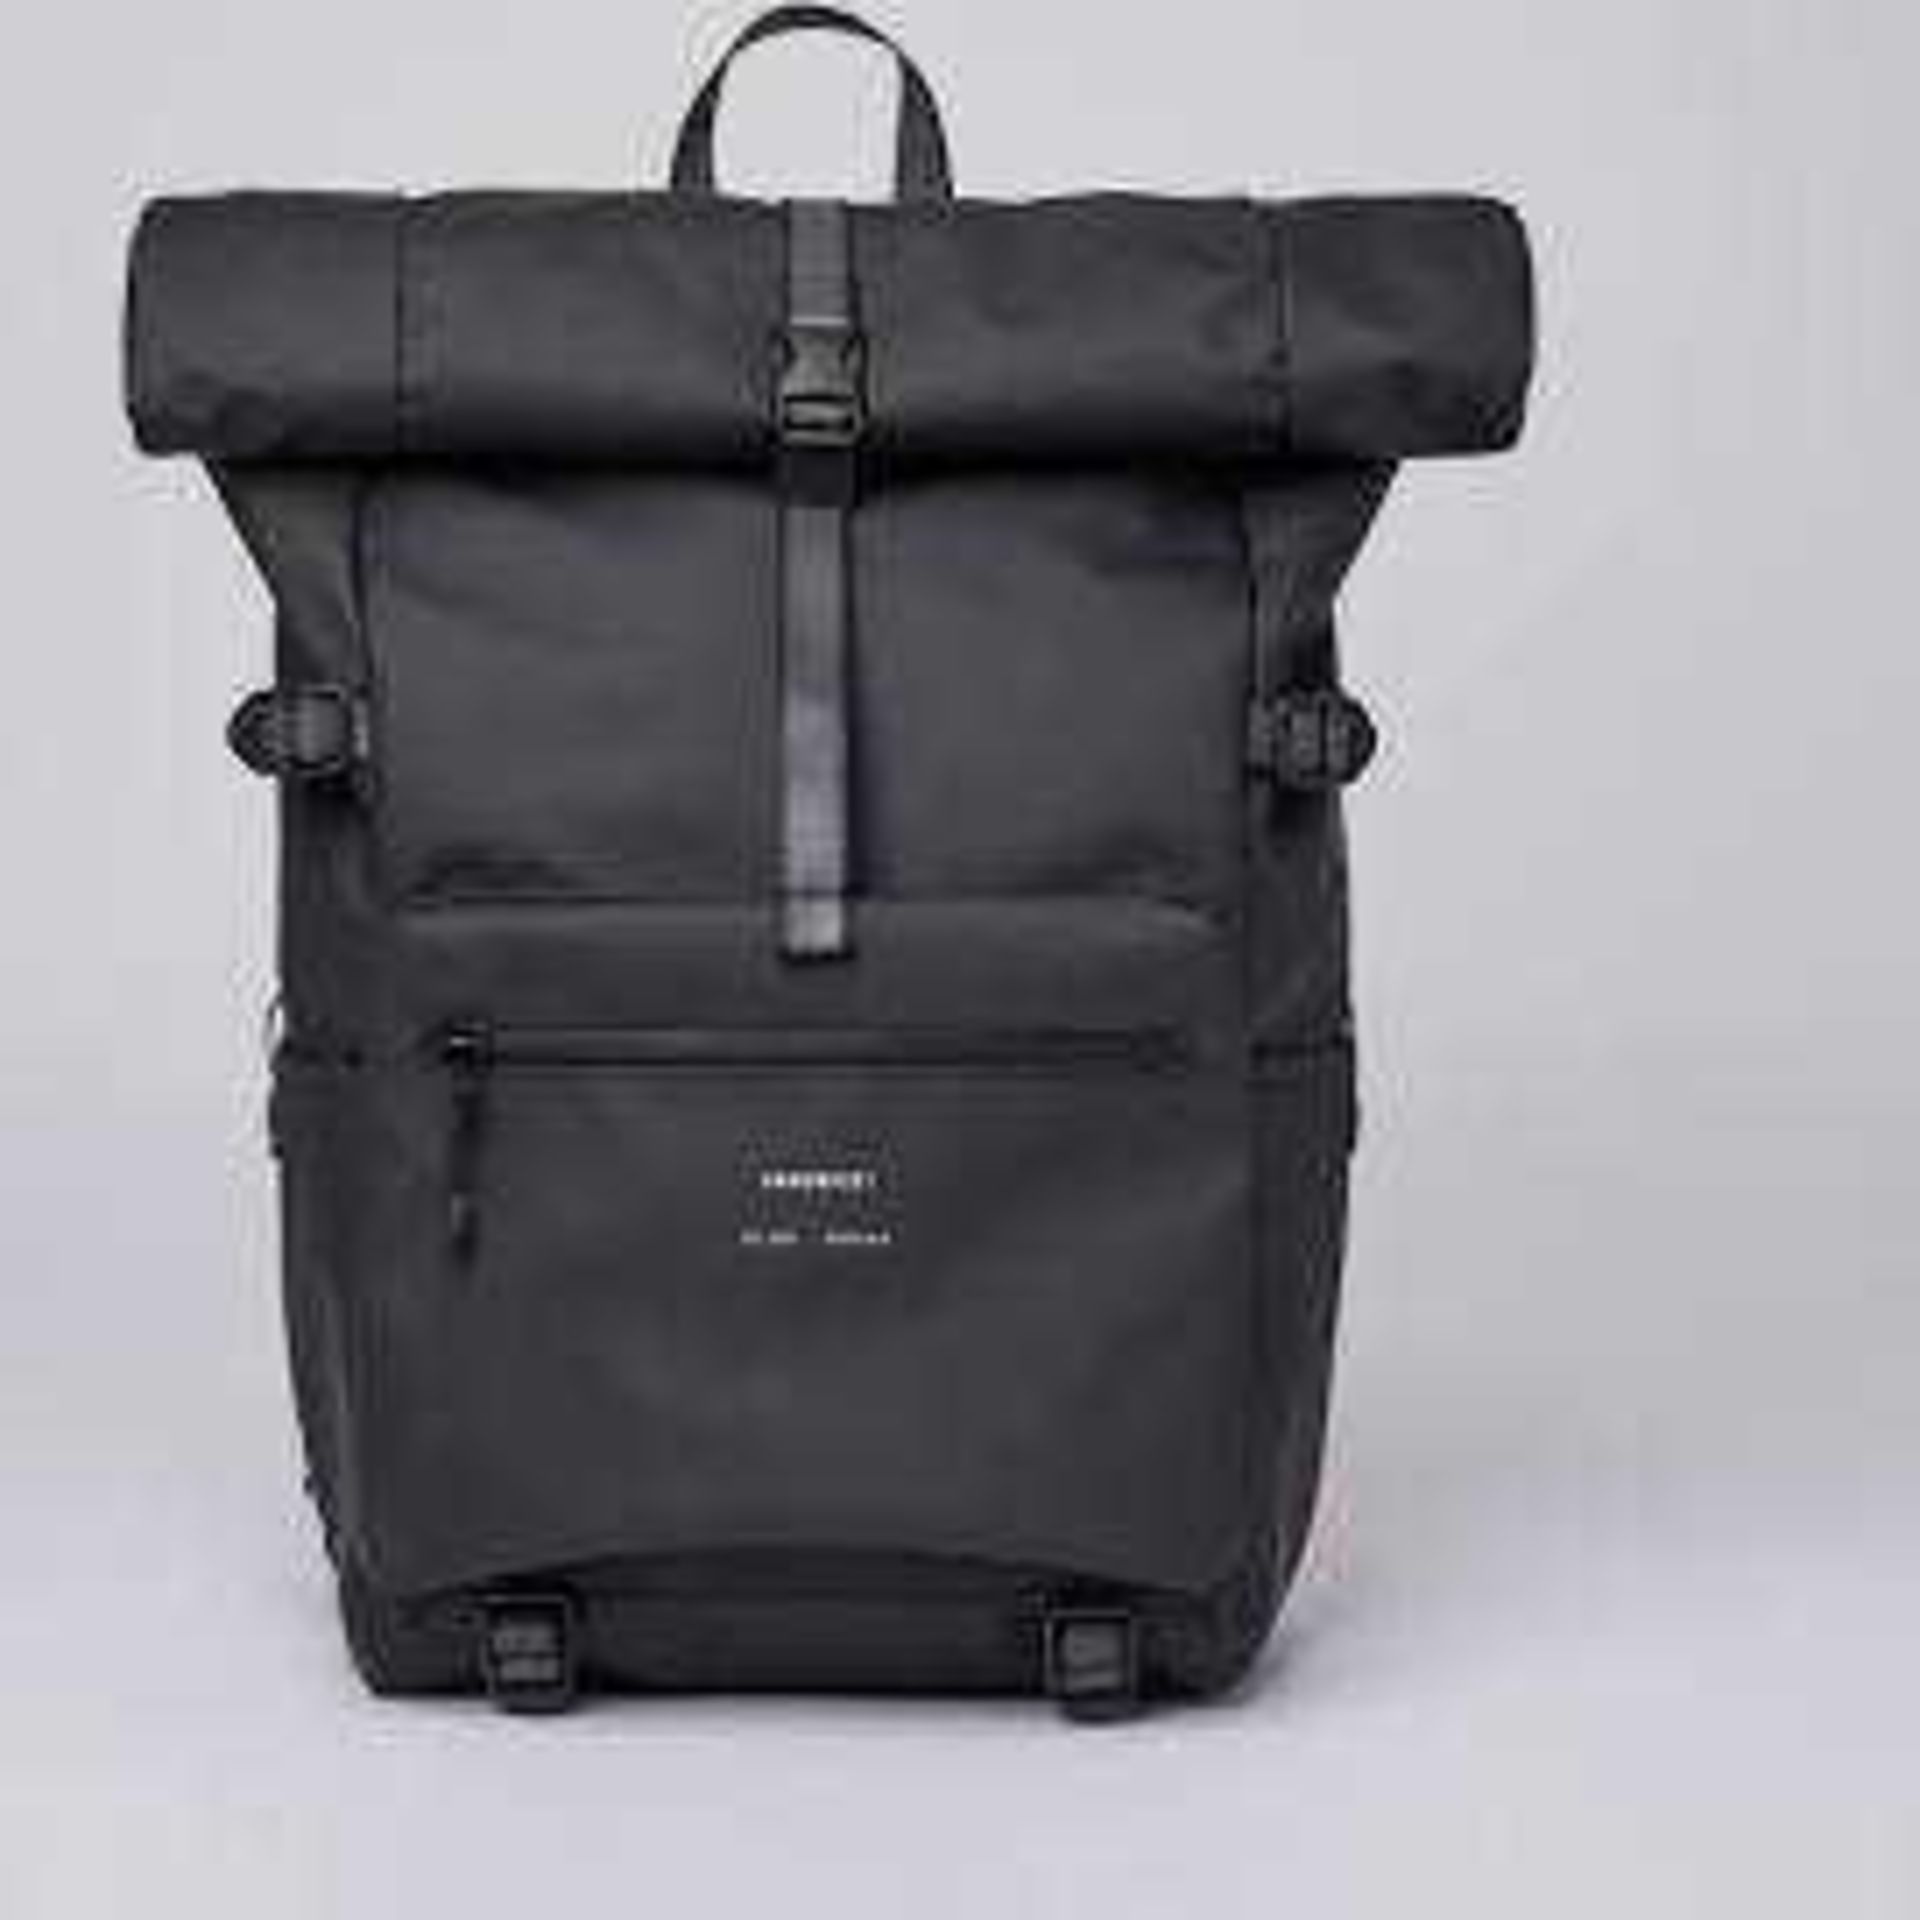 RRP £115 Sandqvist Ruben Navy Blue Backpack 1210750 (Appraisals Available On Request) (Pictures